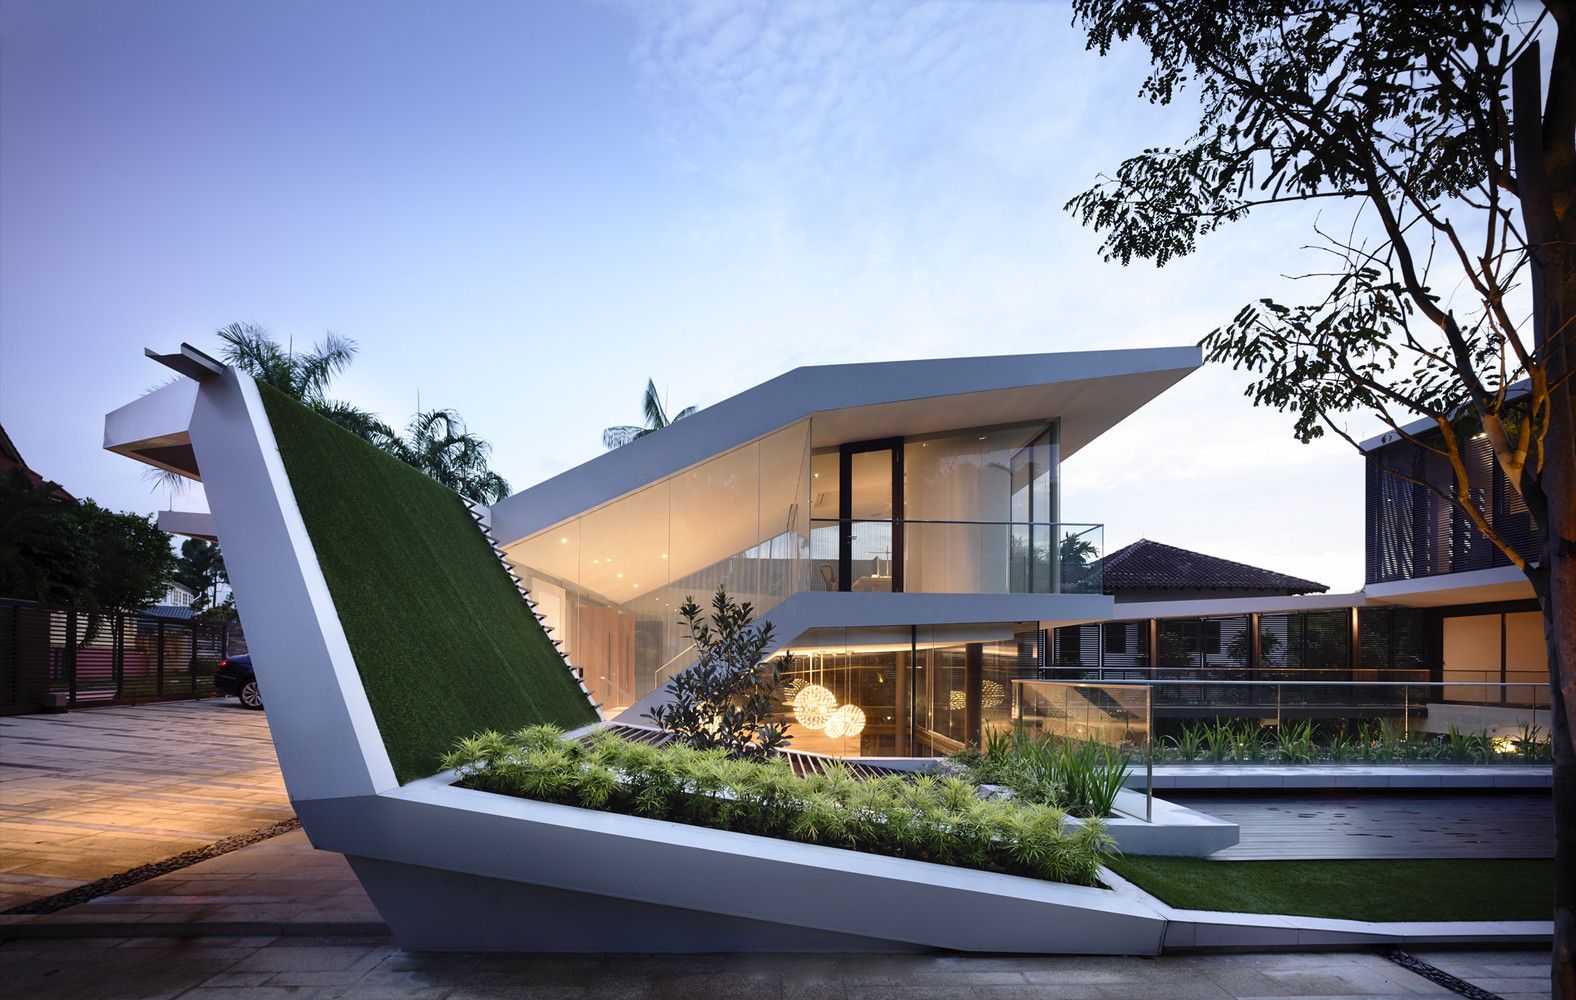 Andrew-Road-Contemporary-Residence-in-Singapore-by-A-D-LAB-16